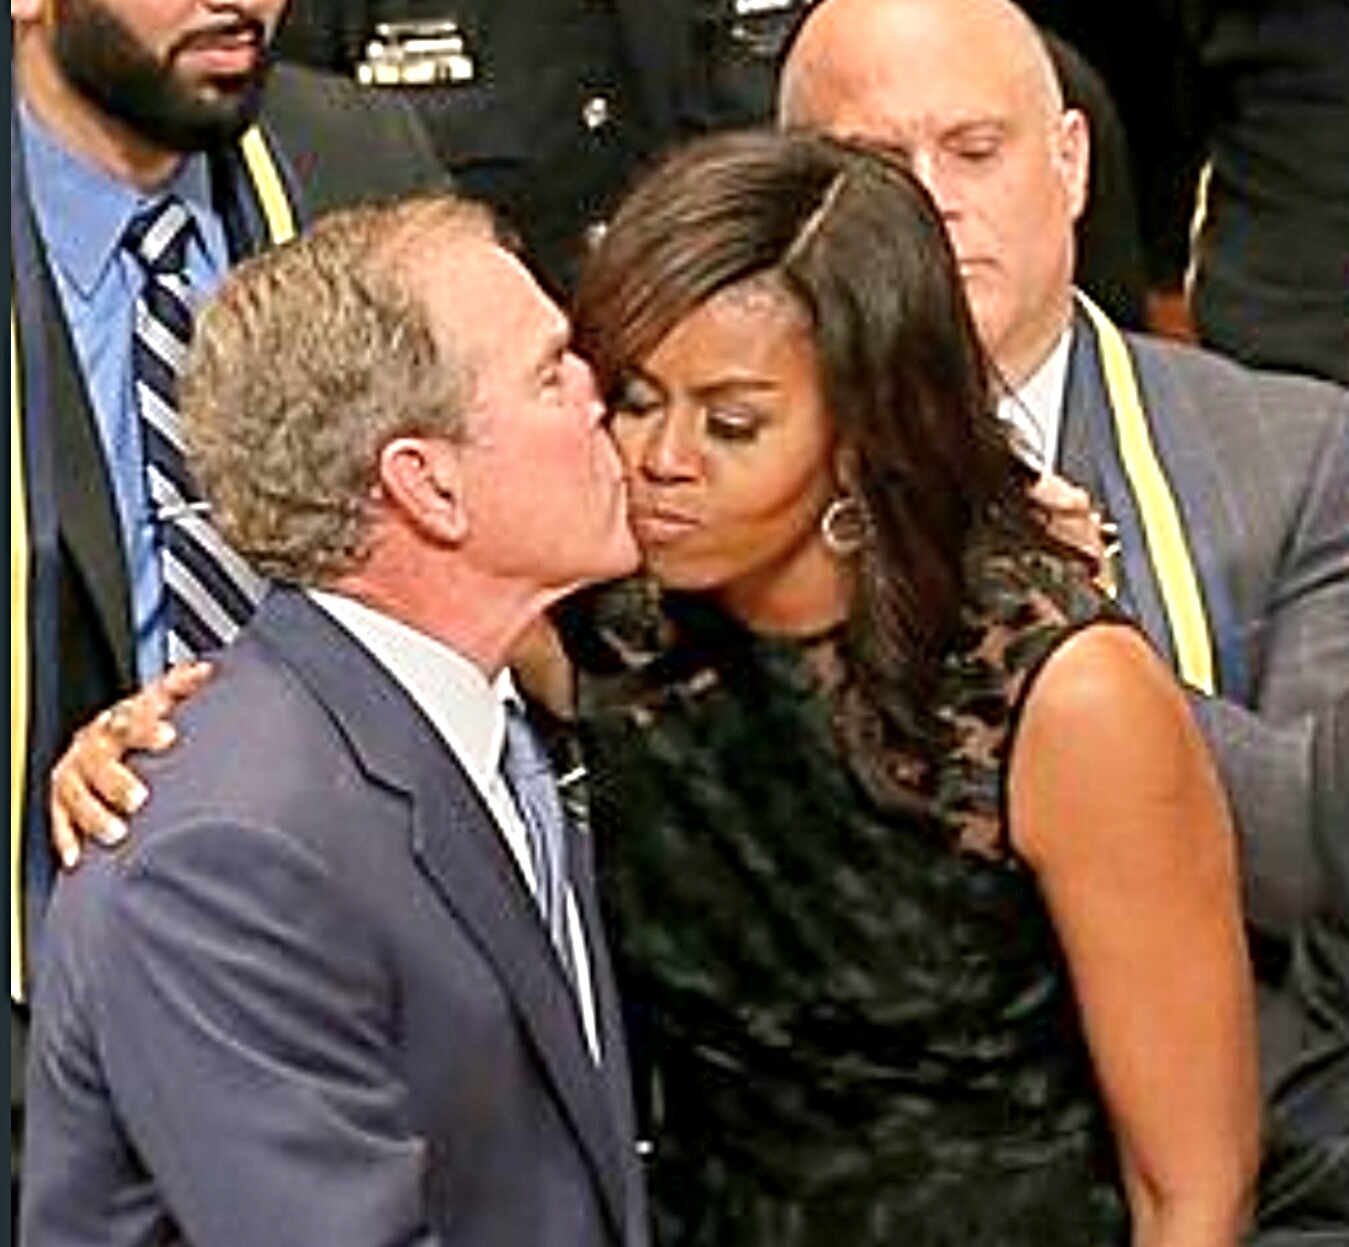 The Strange Relationship Of George W. Bush And Michelle Obama - Photos ...